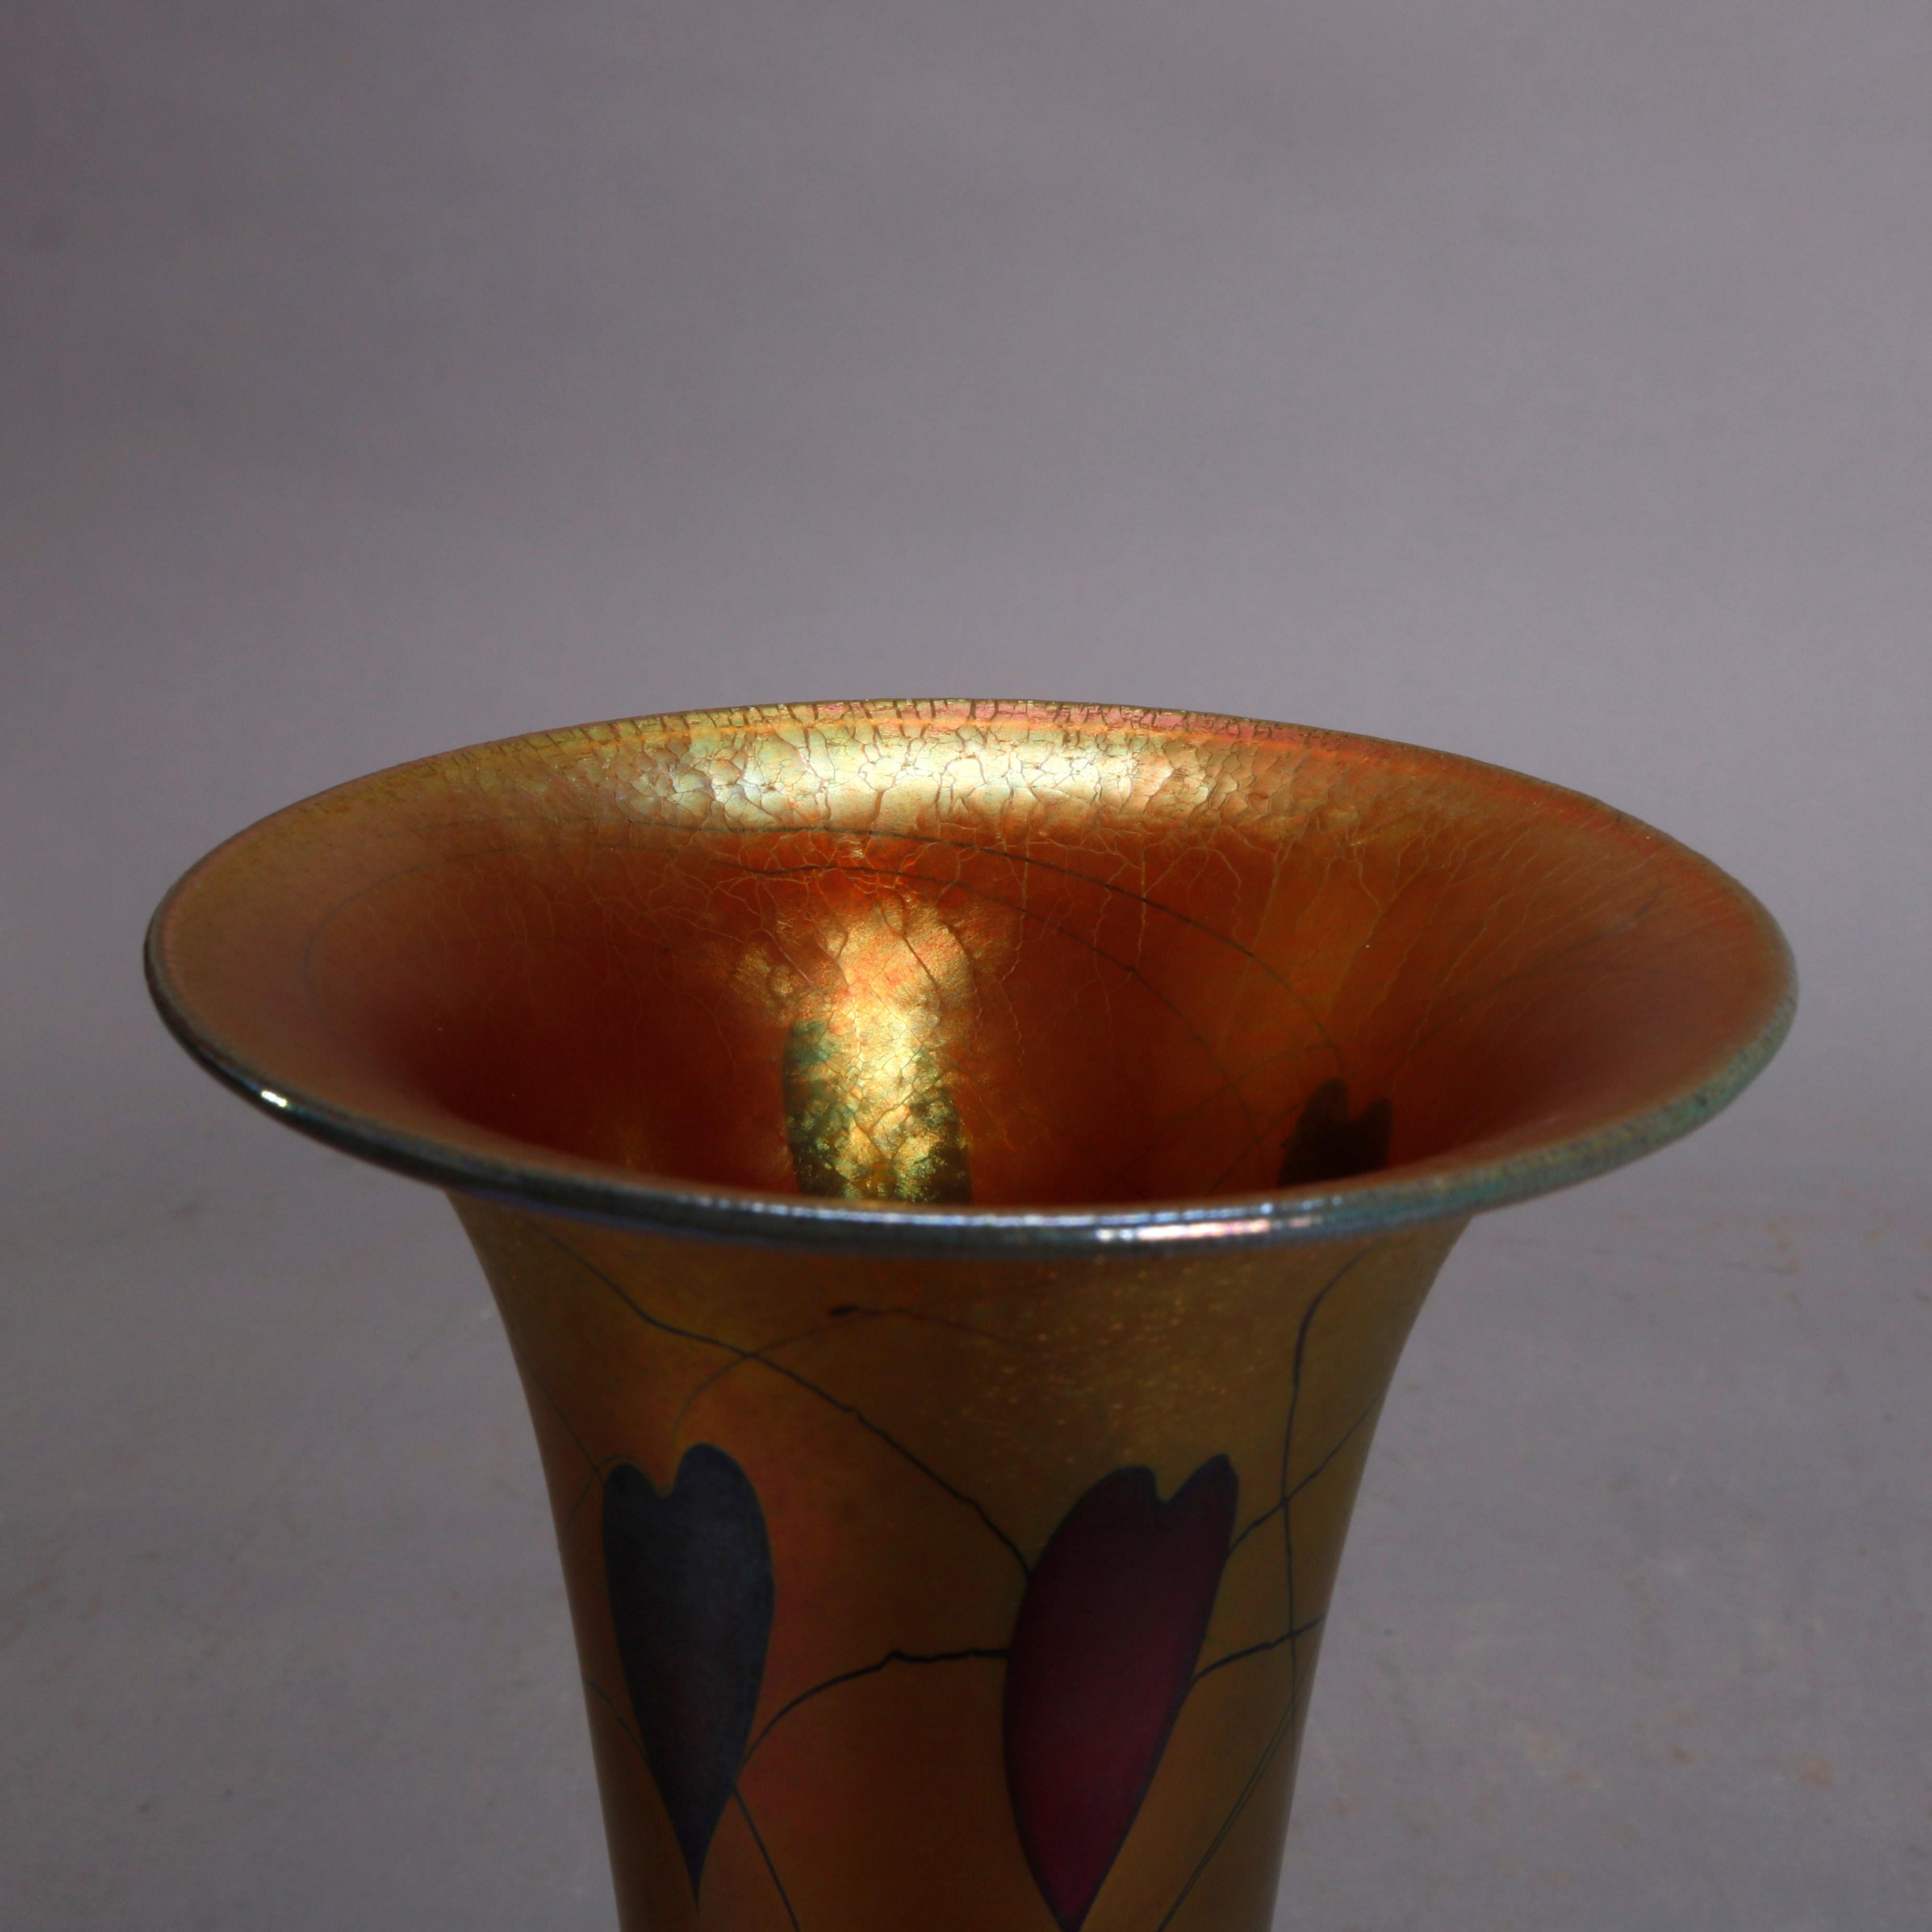 A Arts & Crafts style art glass vase by Lundberg Studios offers trumpet form with gold aurene finish and having heart and vise design, signed on base as photographed, 20th century

Measures: 10